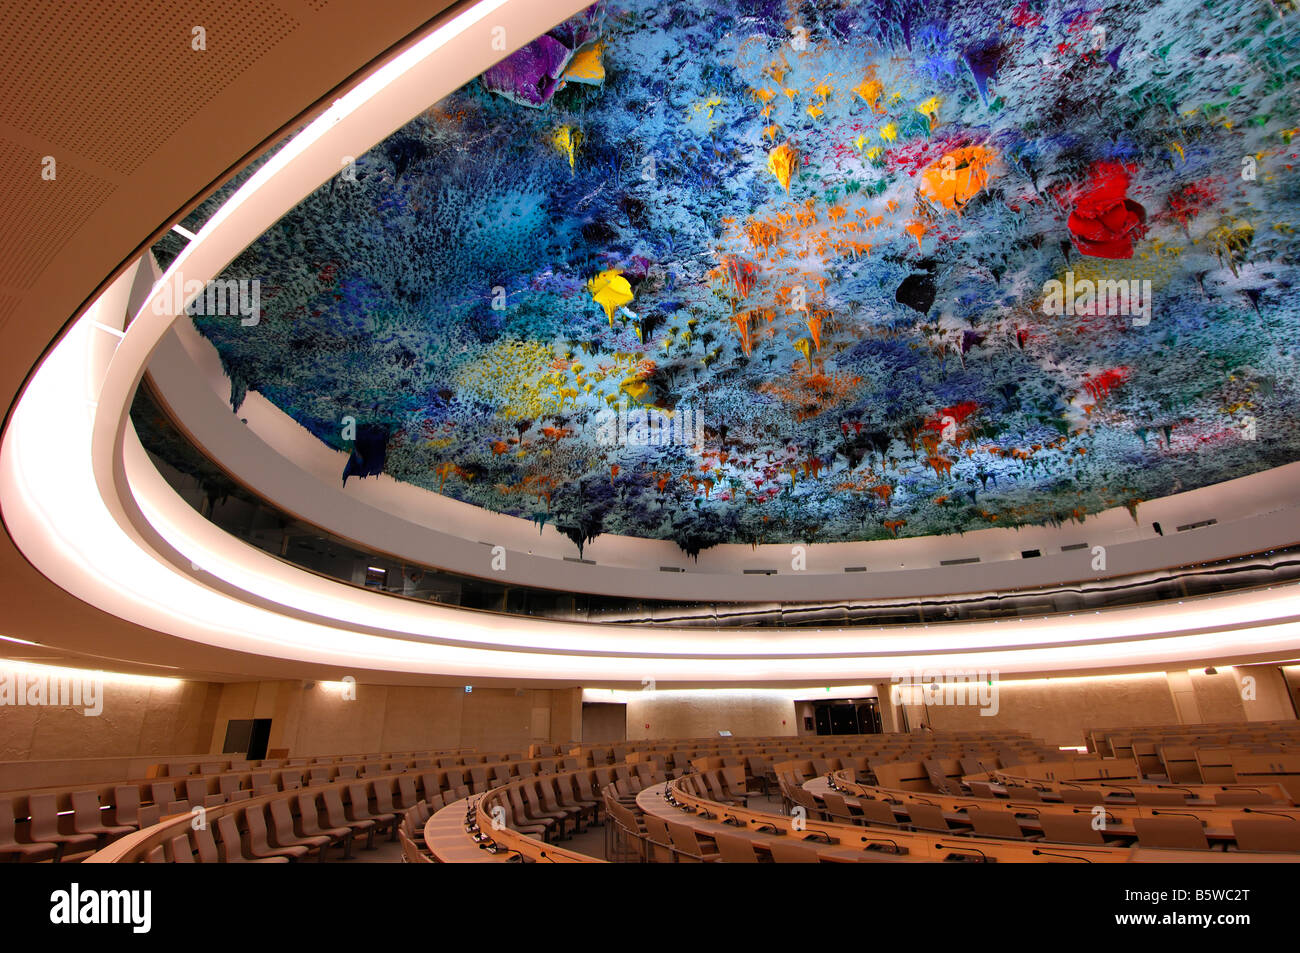 Ceiling sculpture in the Human Rights and Alliance of Civilizations Chamber, Palais des Nations, Geneva, Switzerland Stock Photo